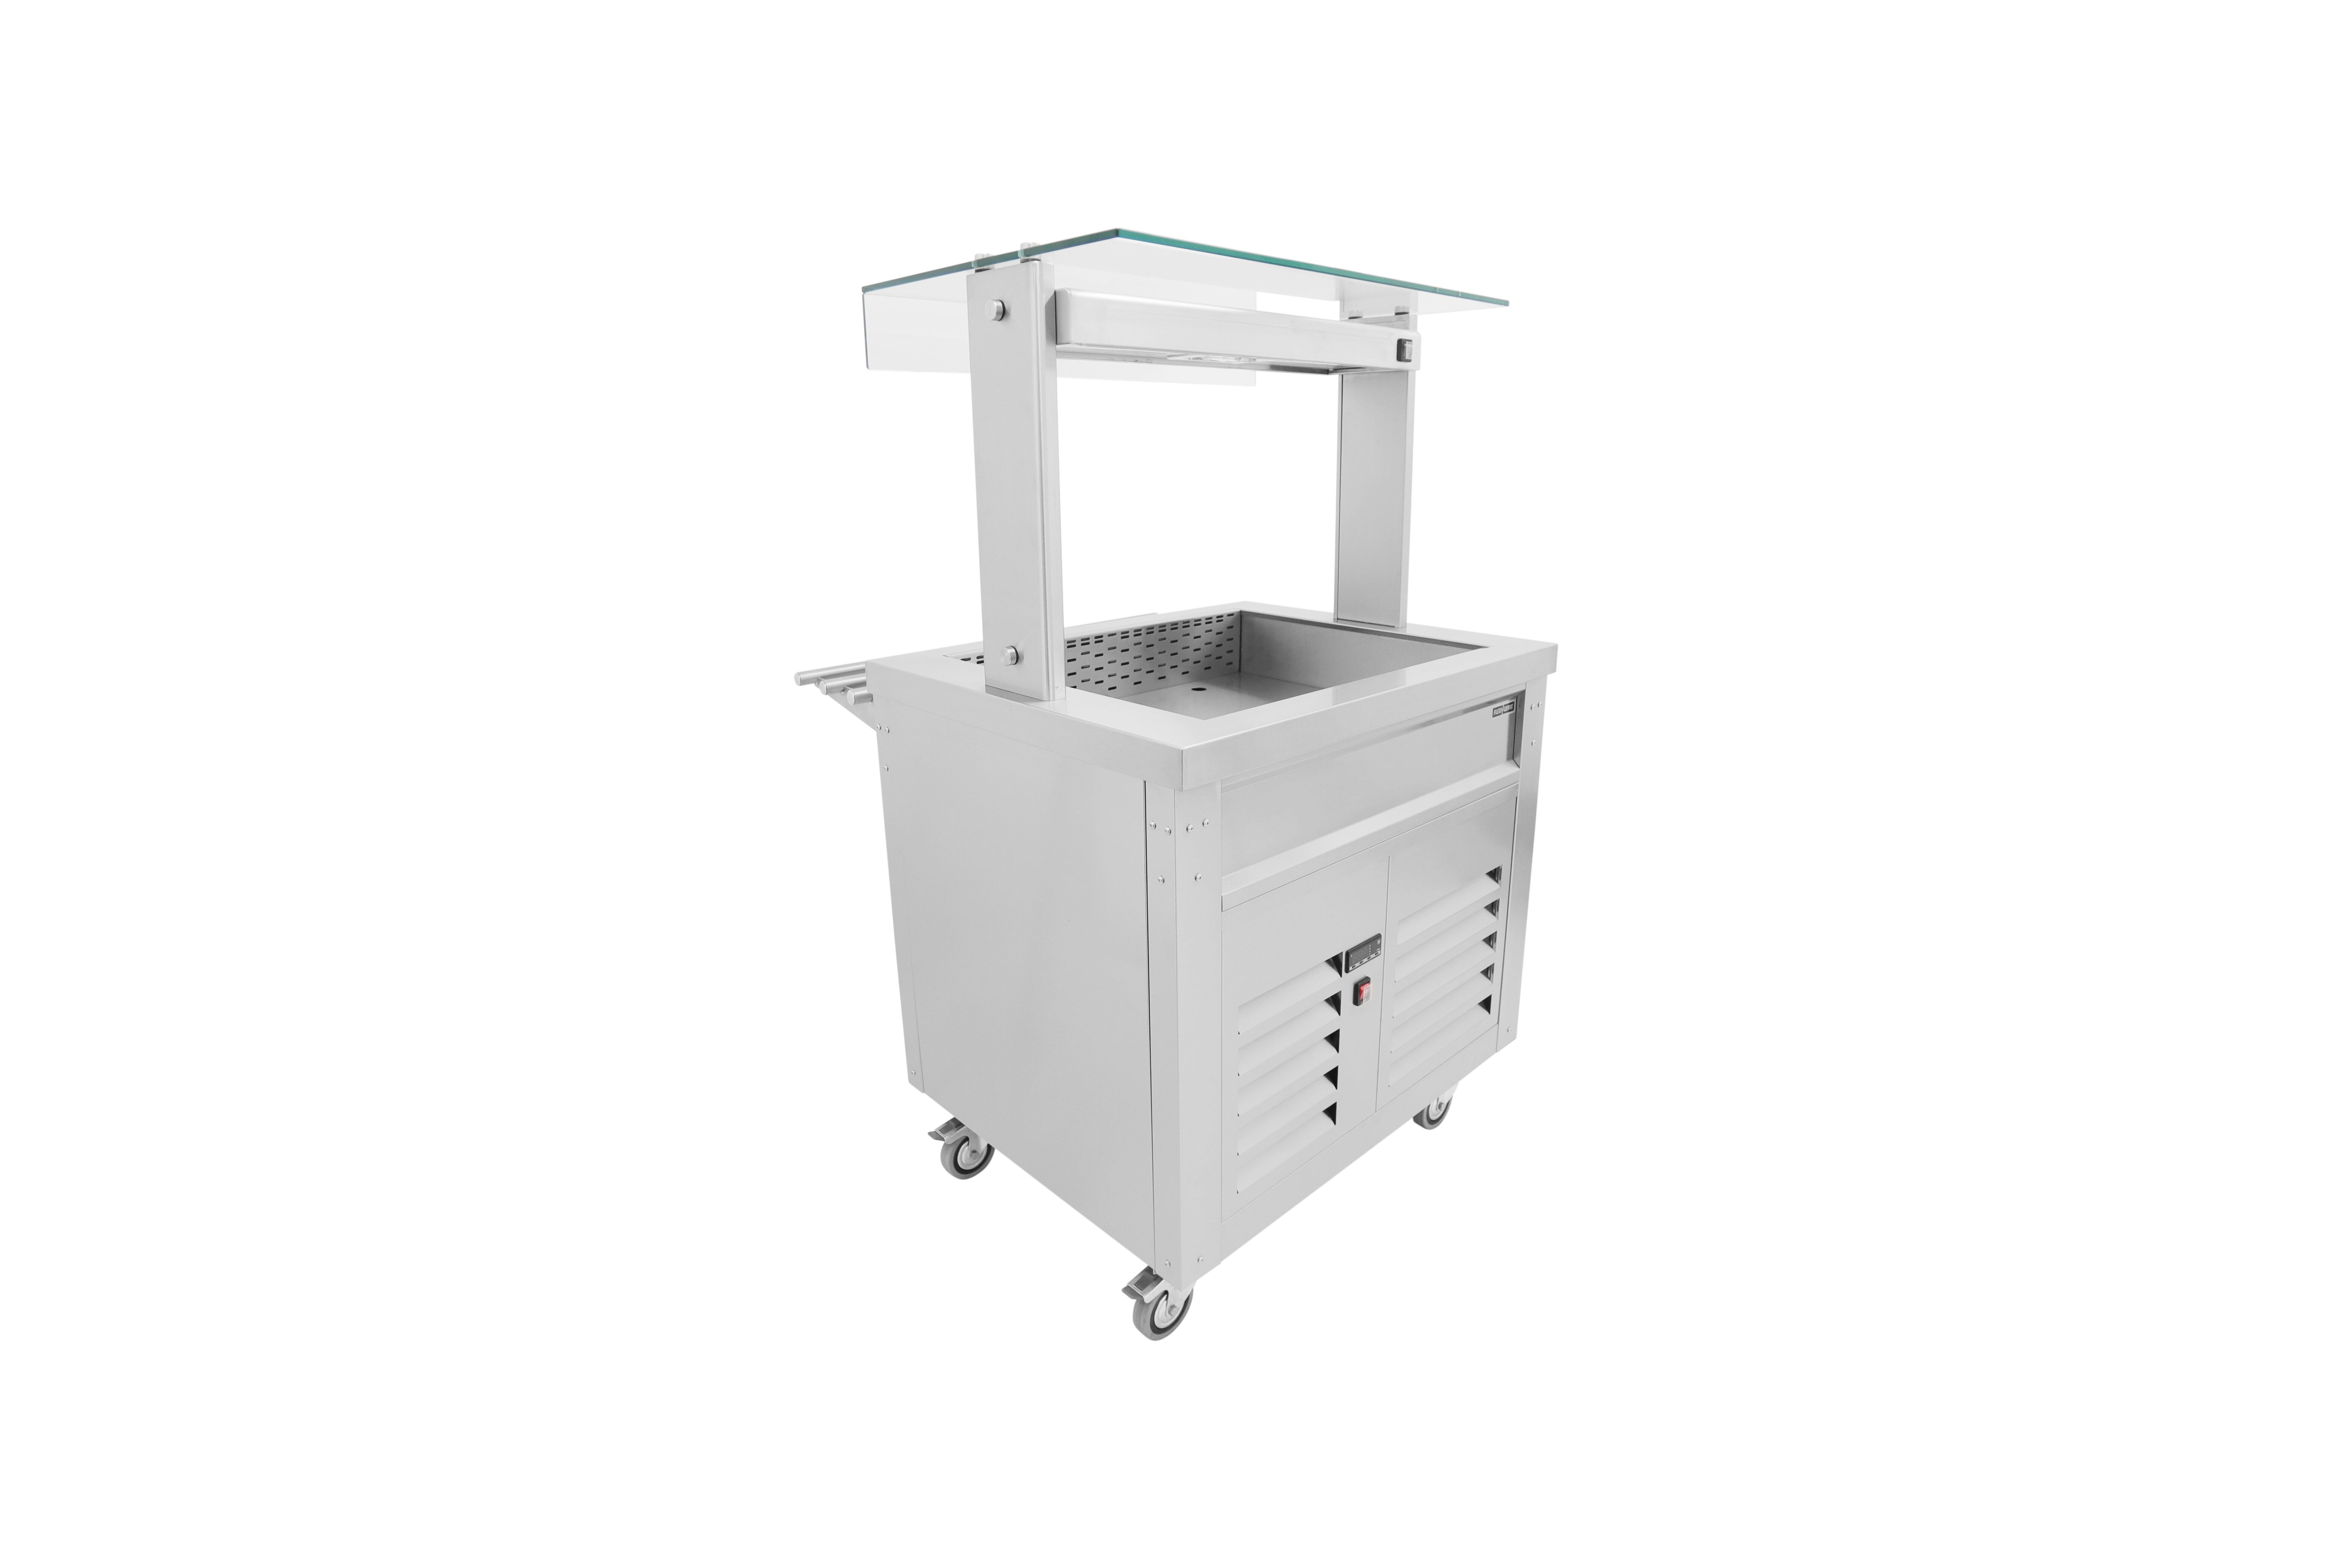 Parry FS-RW3 - Flexi Serve with Refrigerated Well With LED Illuminated Gantry